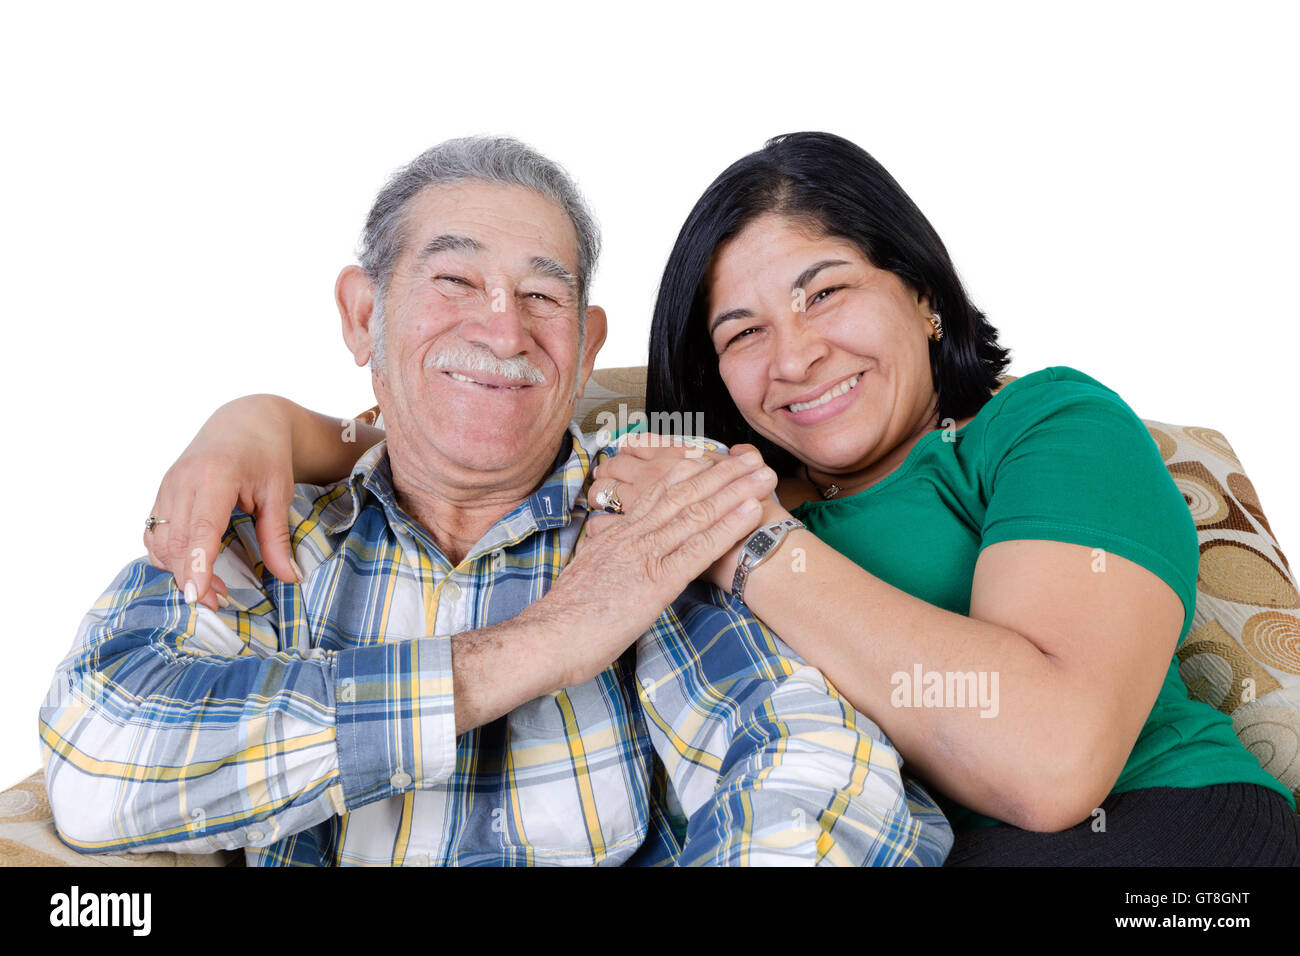 Happy Mexican senior with mustache touching hand of happy daughter sitting together on sofa Stock Photo